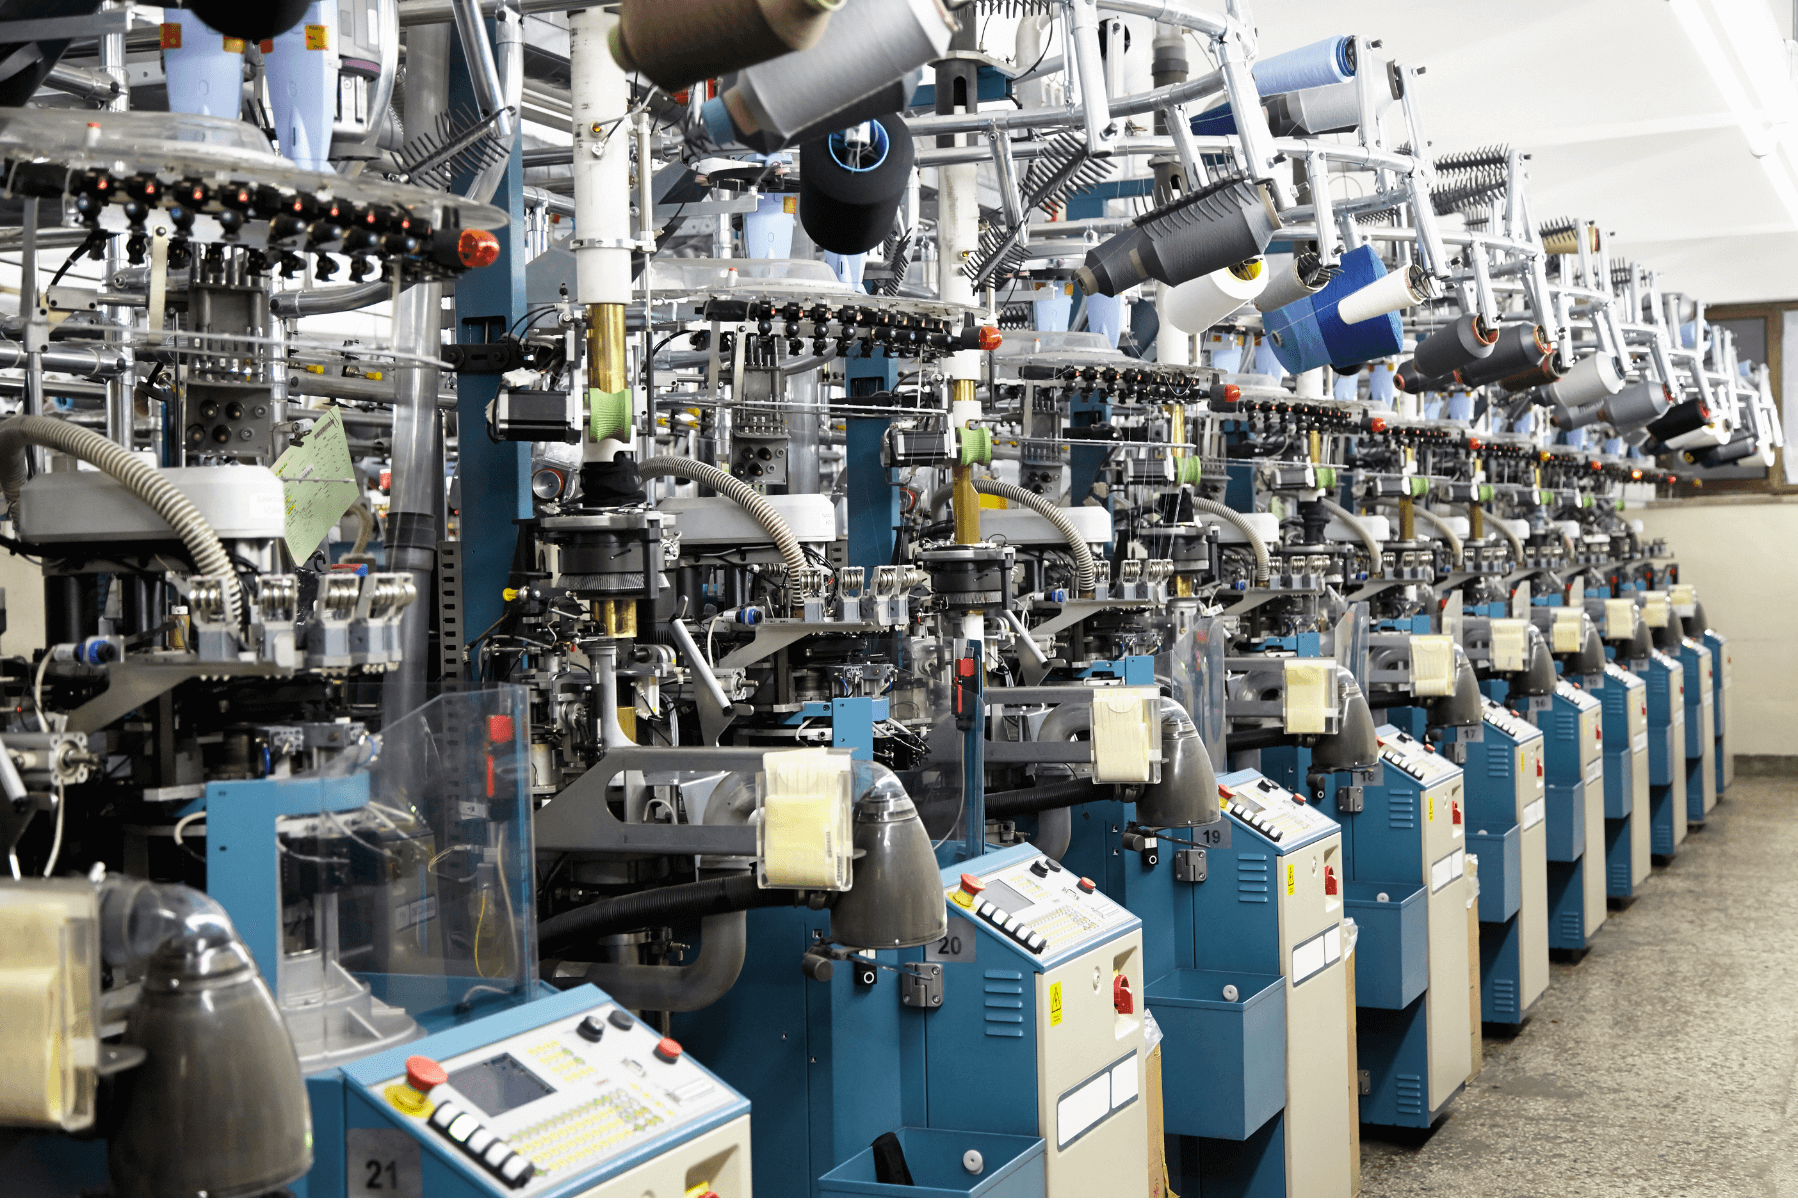 Professional Socks Manufacturer owns 6 socks factories and 4000 sets of advanced All-In-One Intelligent Machines with Higg Index, Sedex, Wrap, SGS, BSCI, and OEKO-TEX certificates